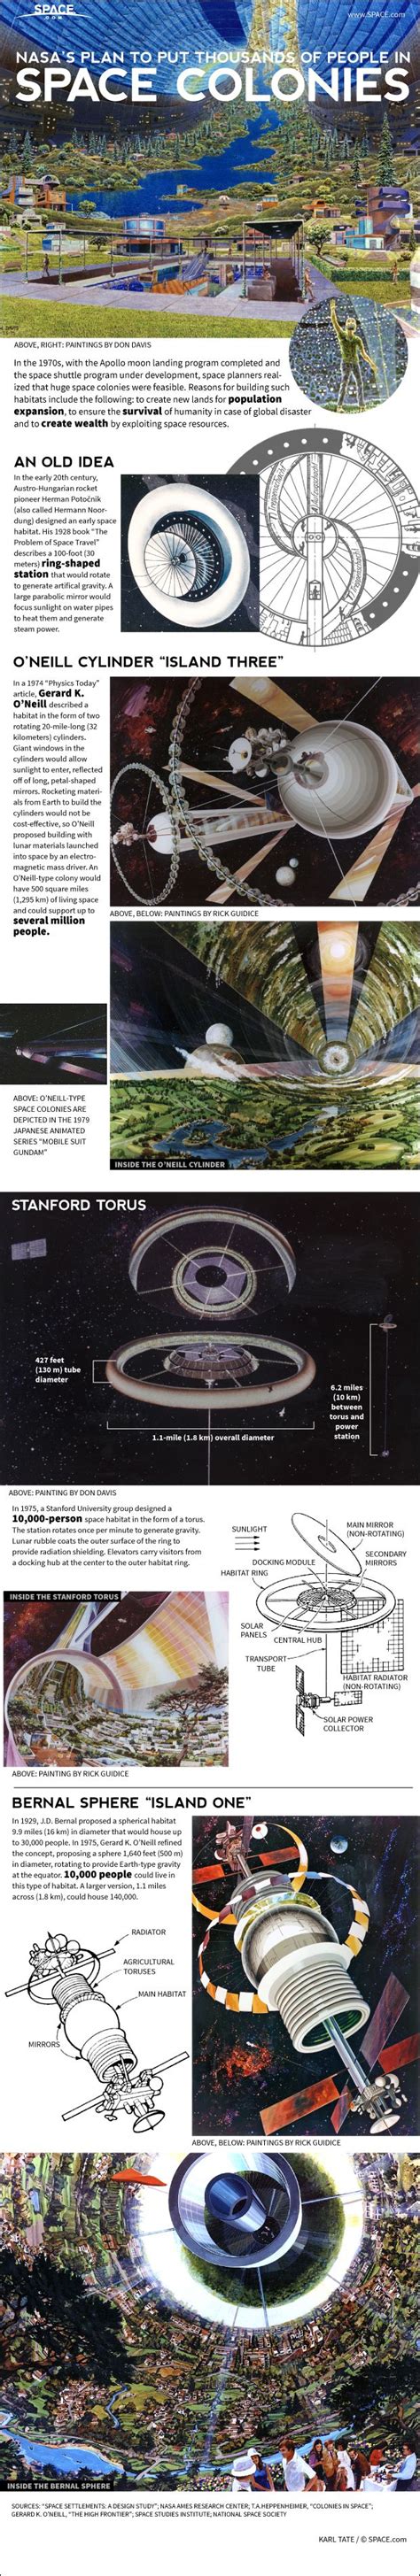 Nasas Giant Space Colony Concepts Explained Infographic Space